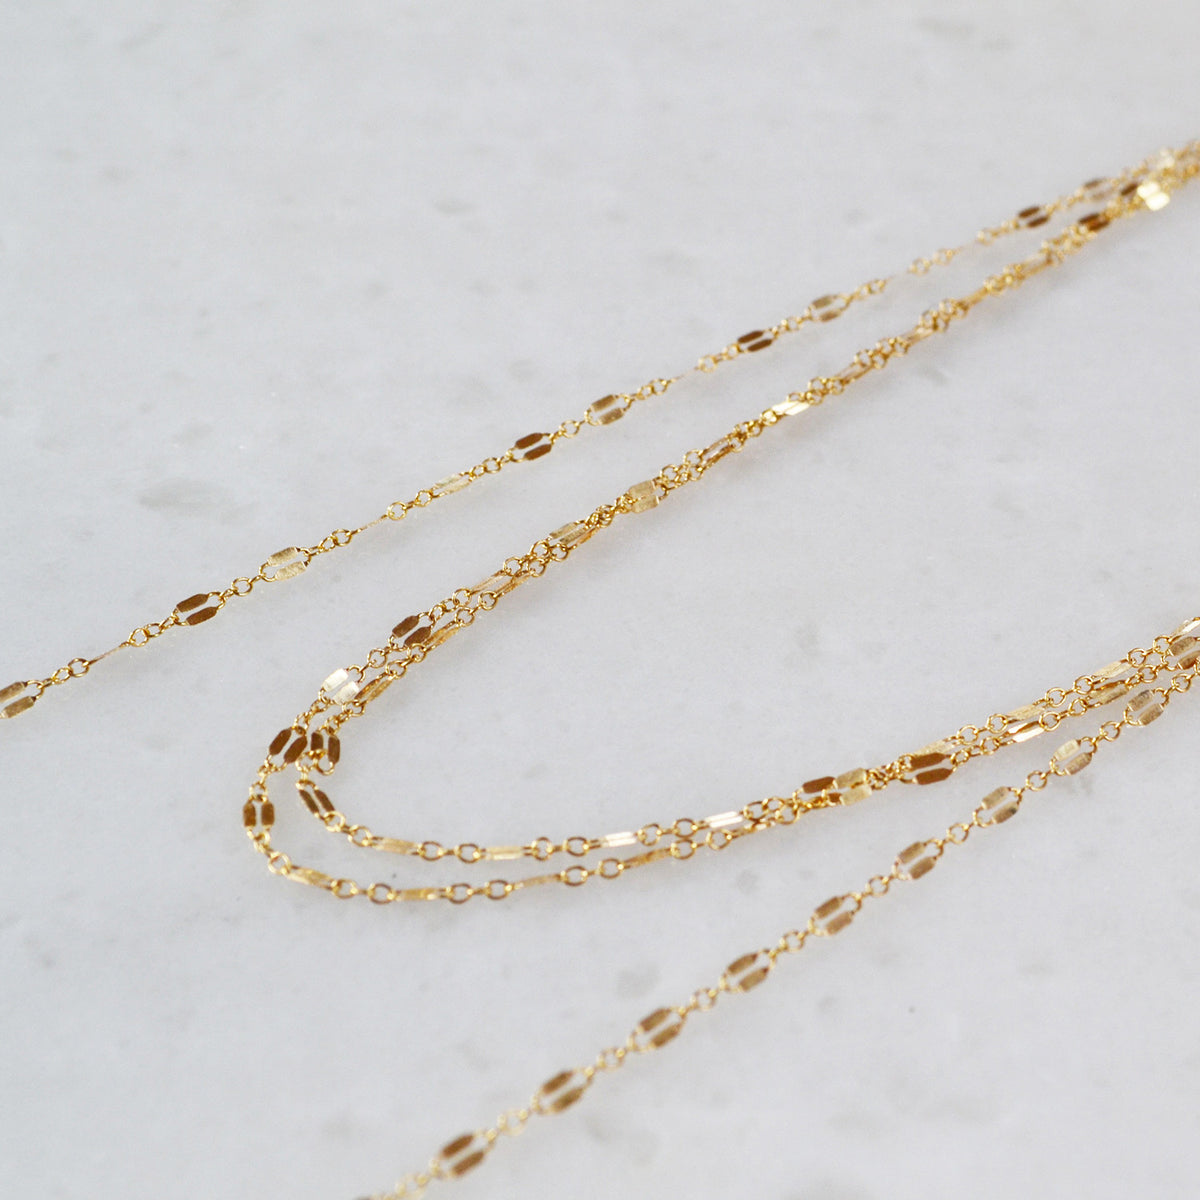 Chain Wrap Choker Necklace, Gold, Rose Gold, or Sterling